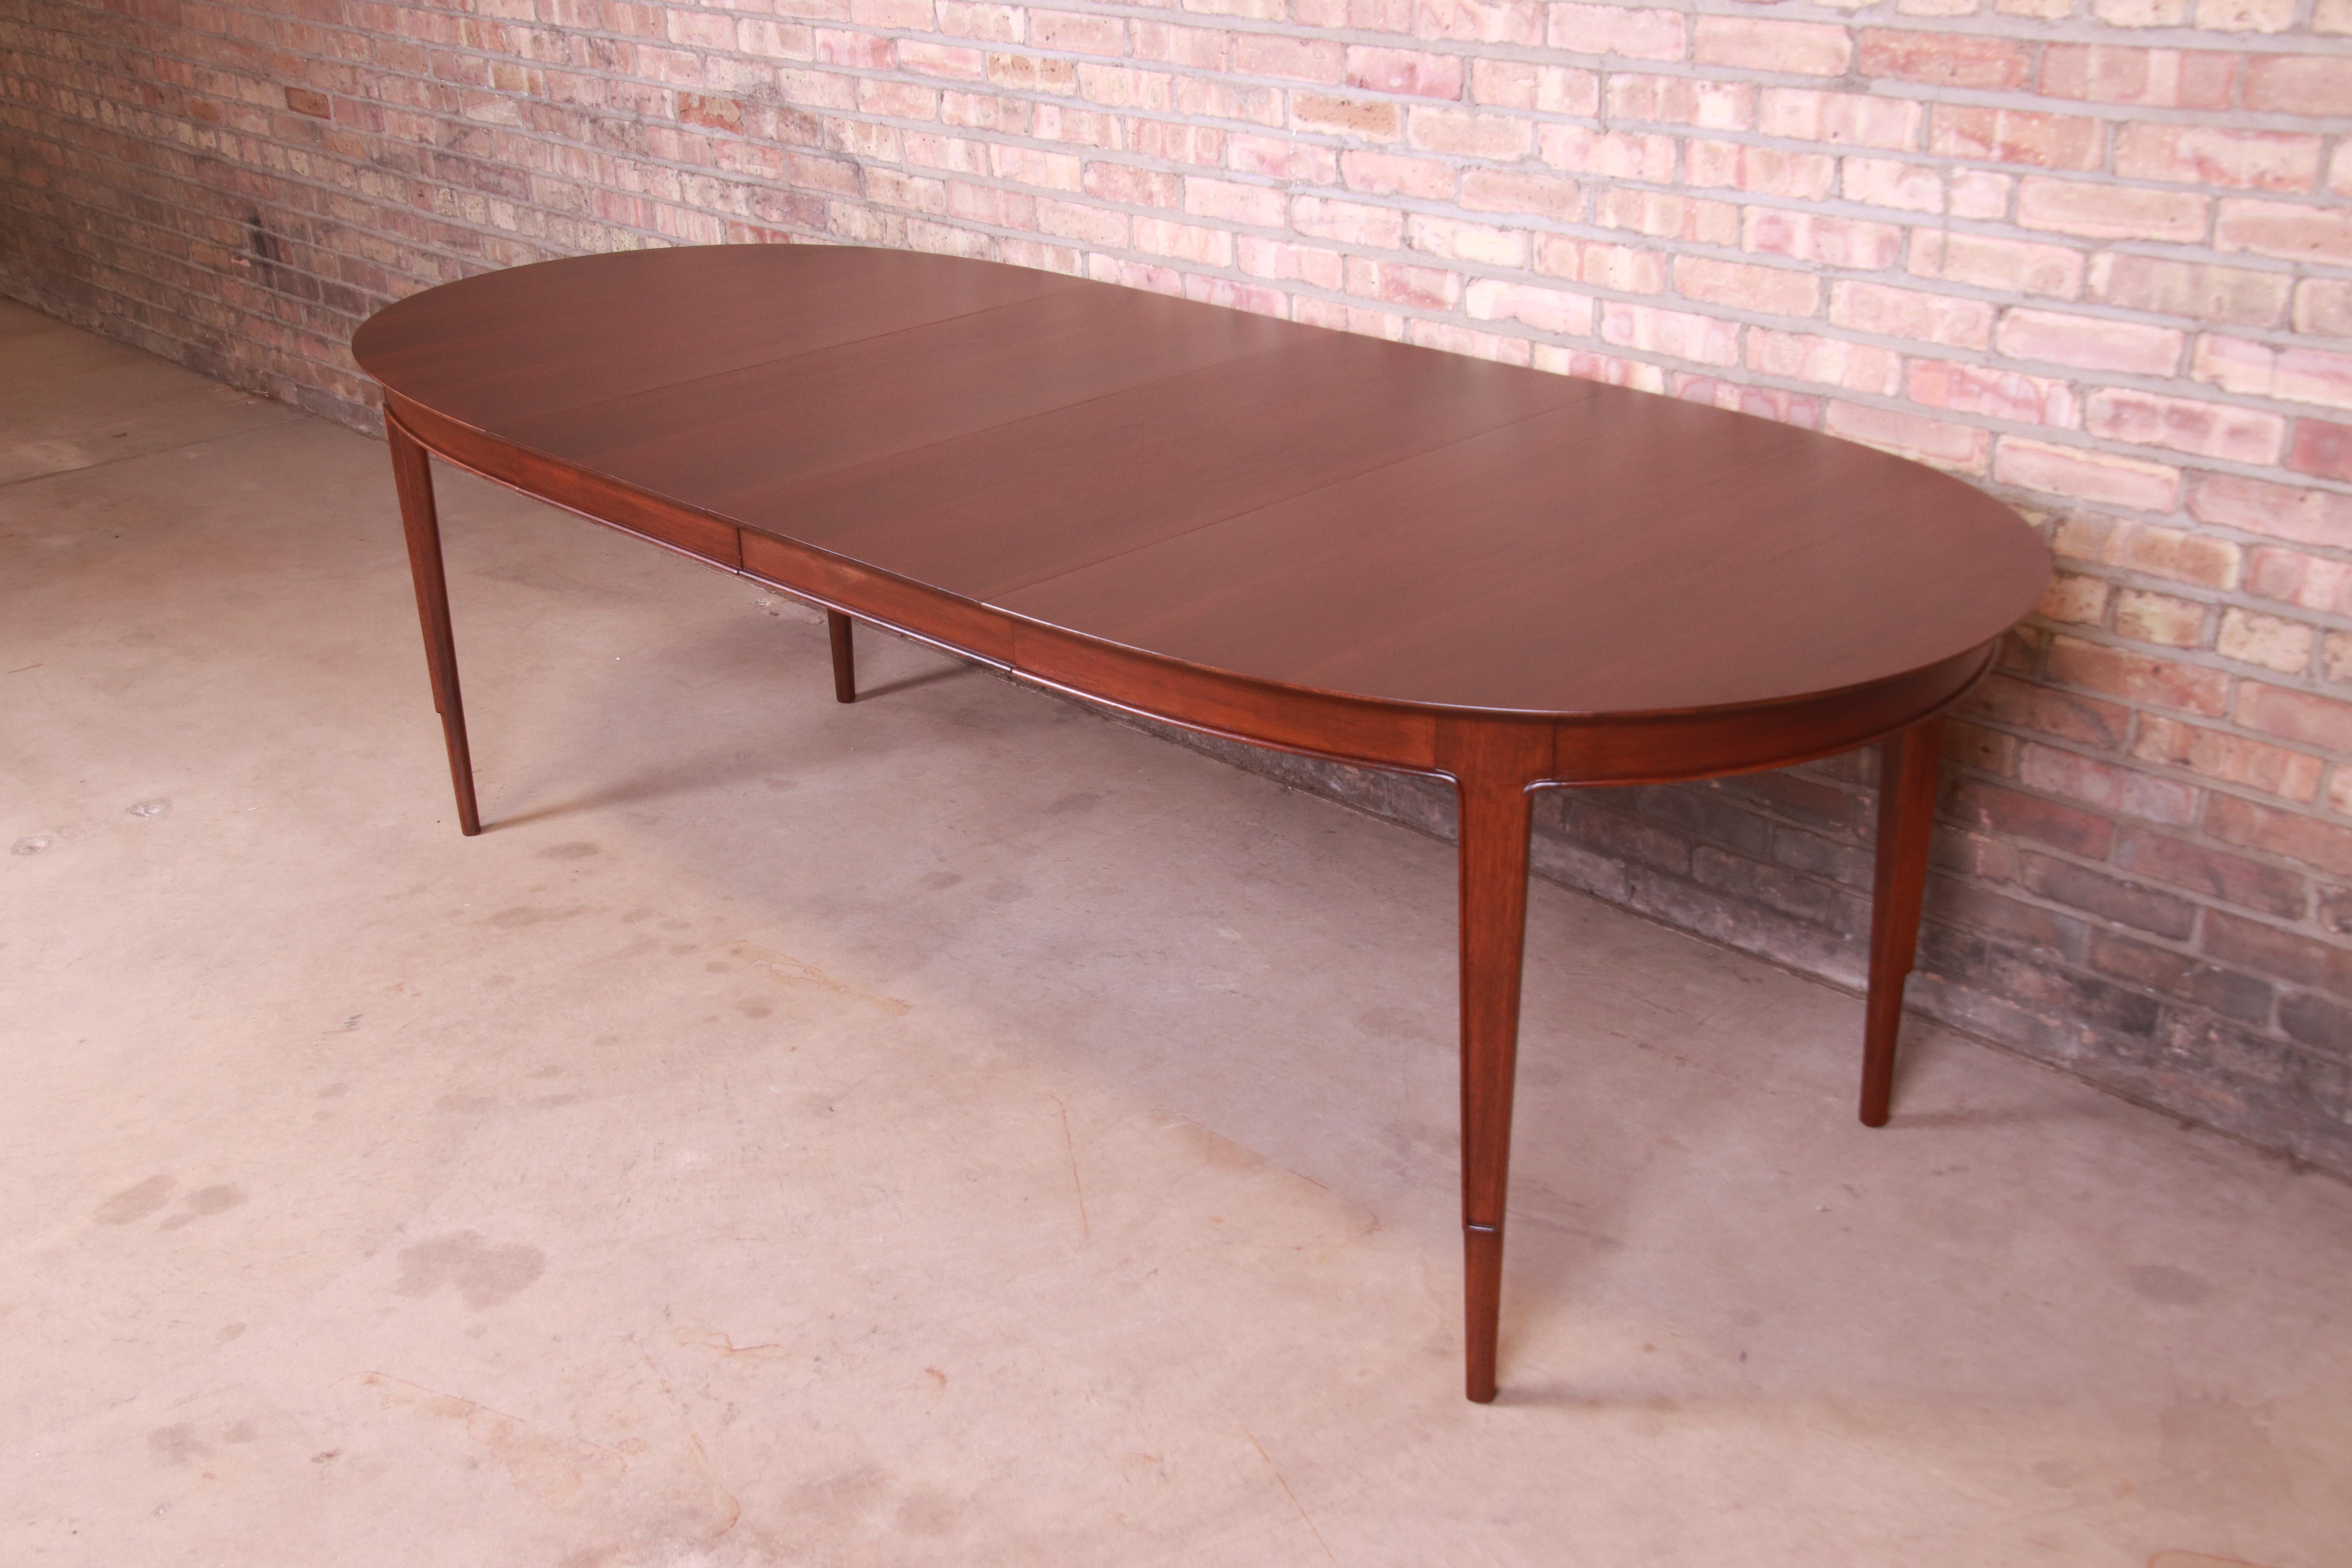 American John Stuart Janus Collection Sculpted Walnut Dining Table, Newly Refinished